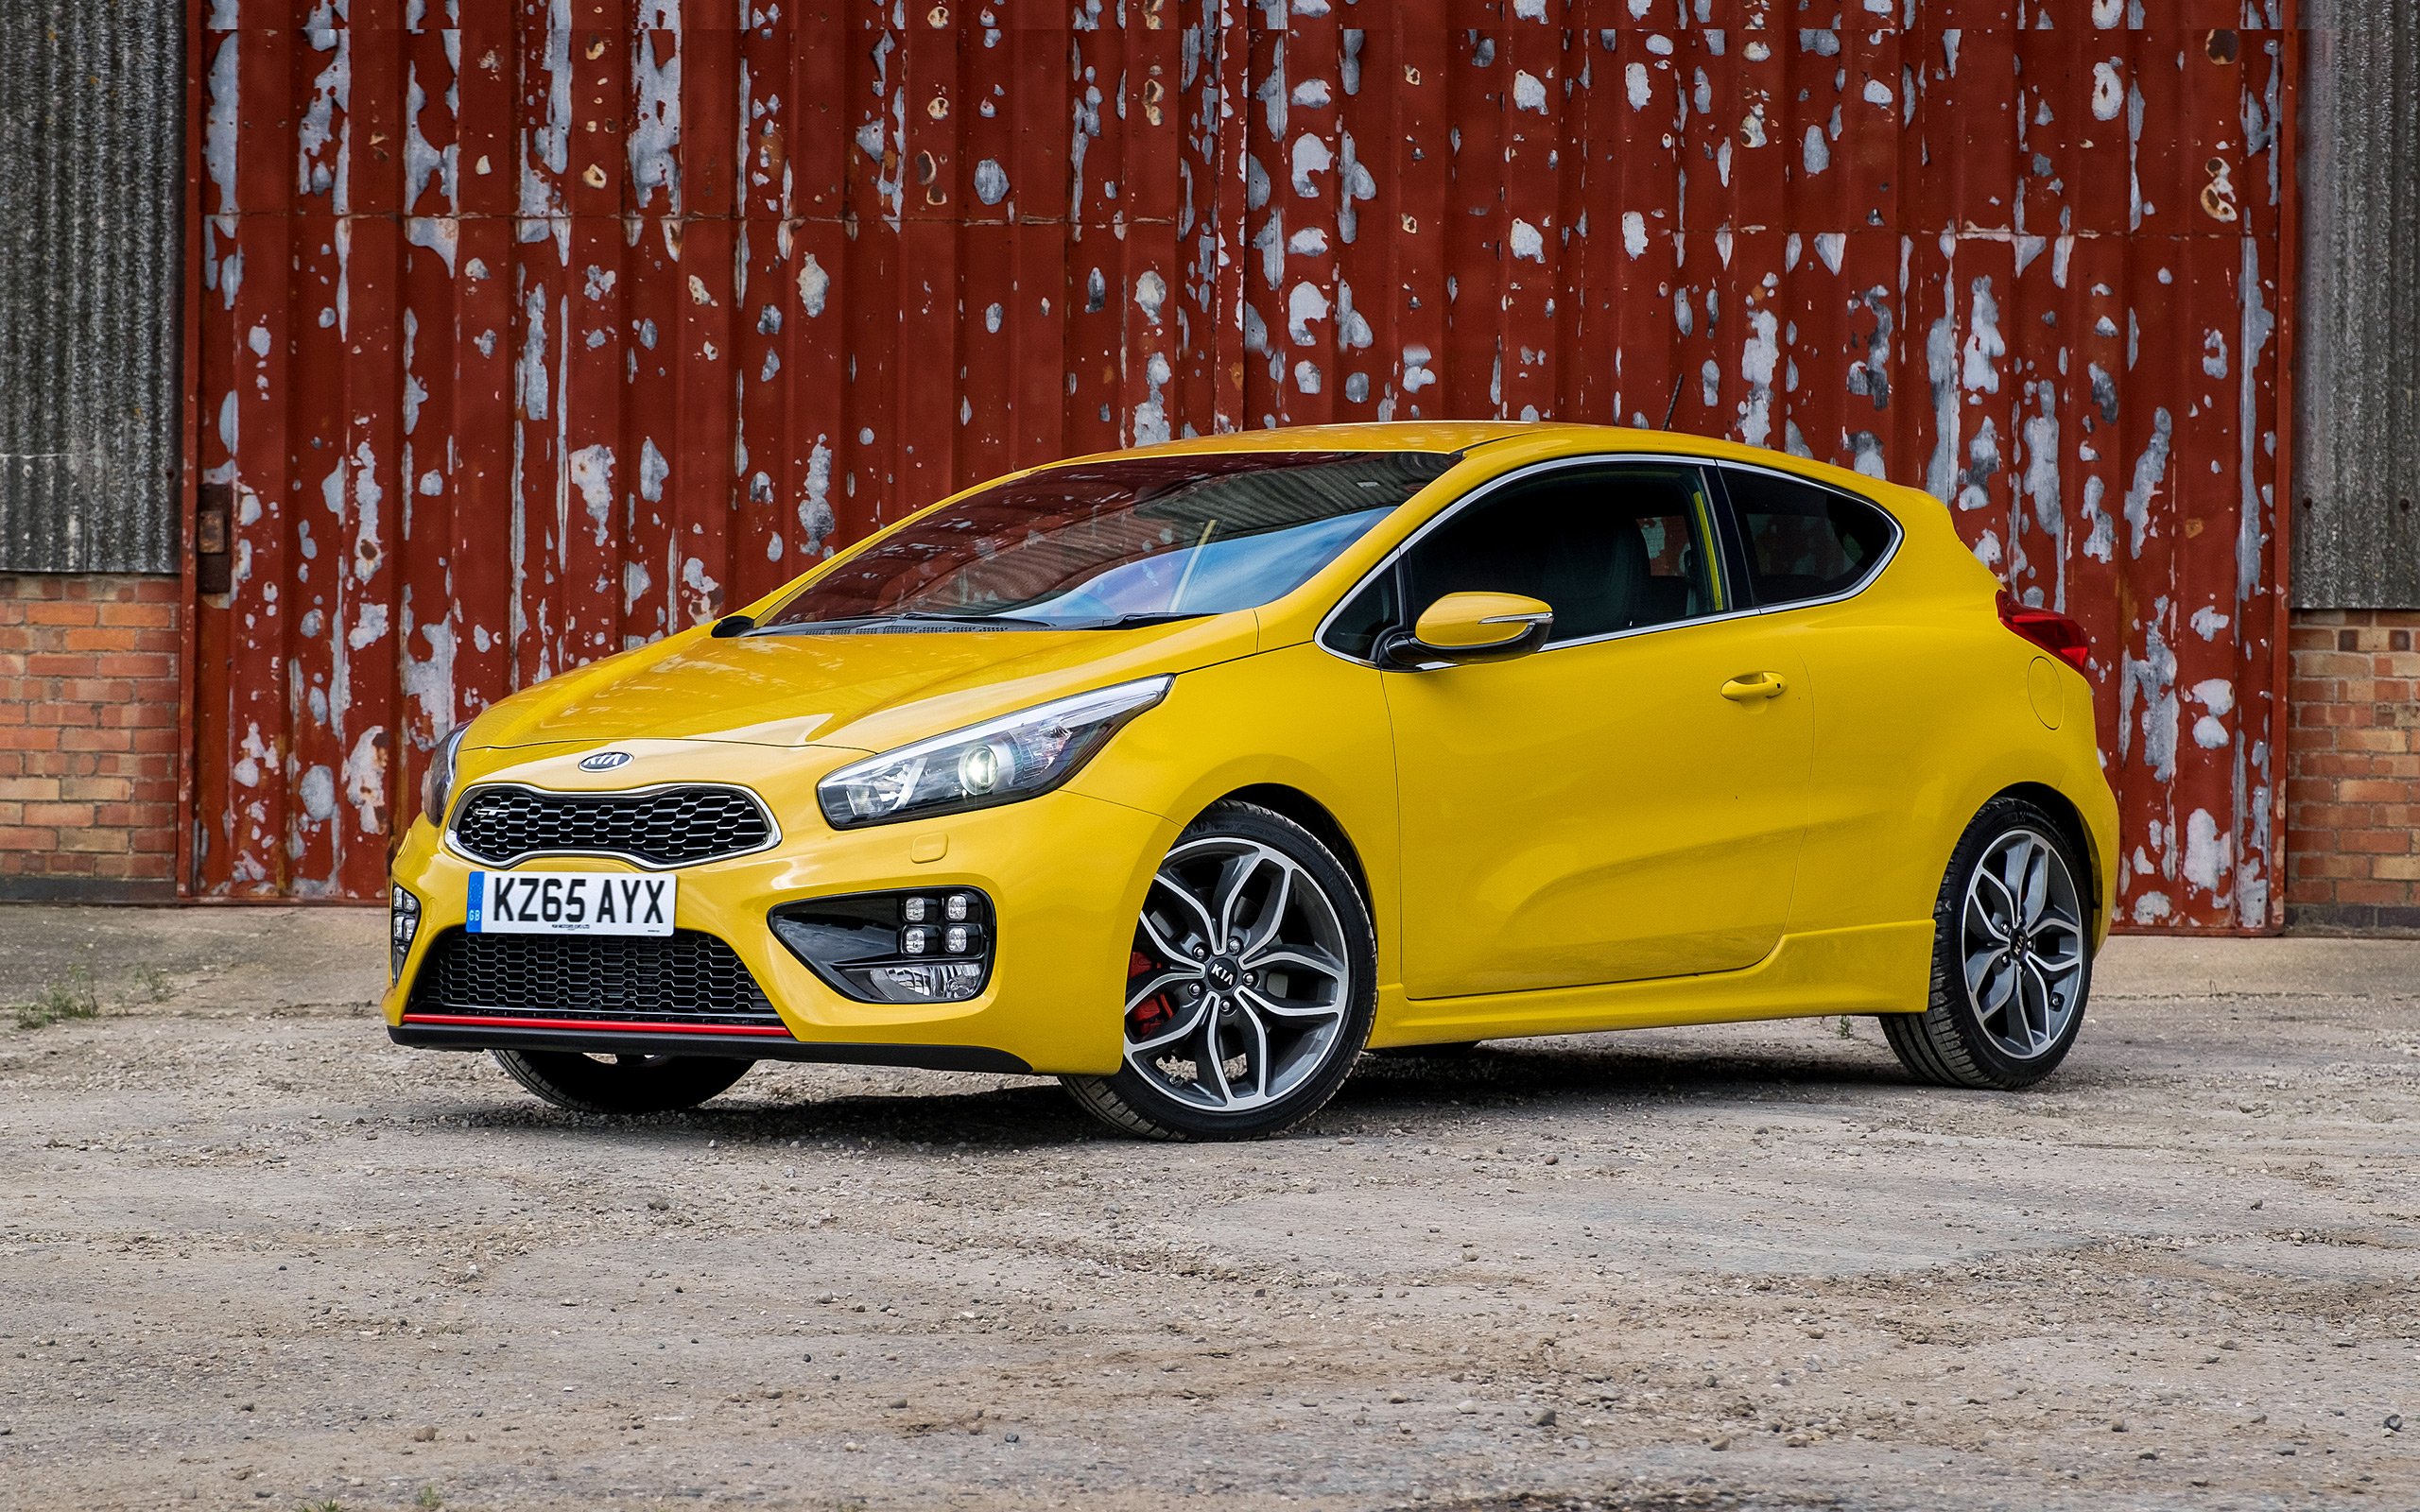 2016, Kia, Pro, Ceed, G t Wallpapers HD / Desktop and